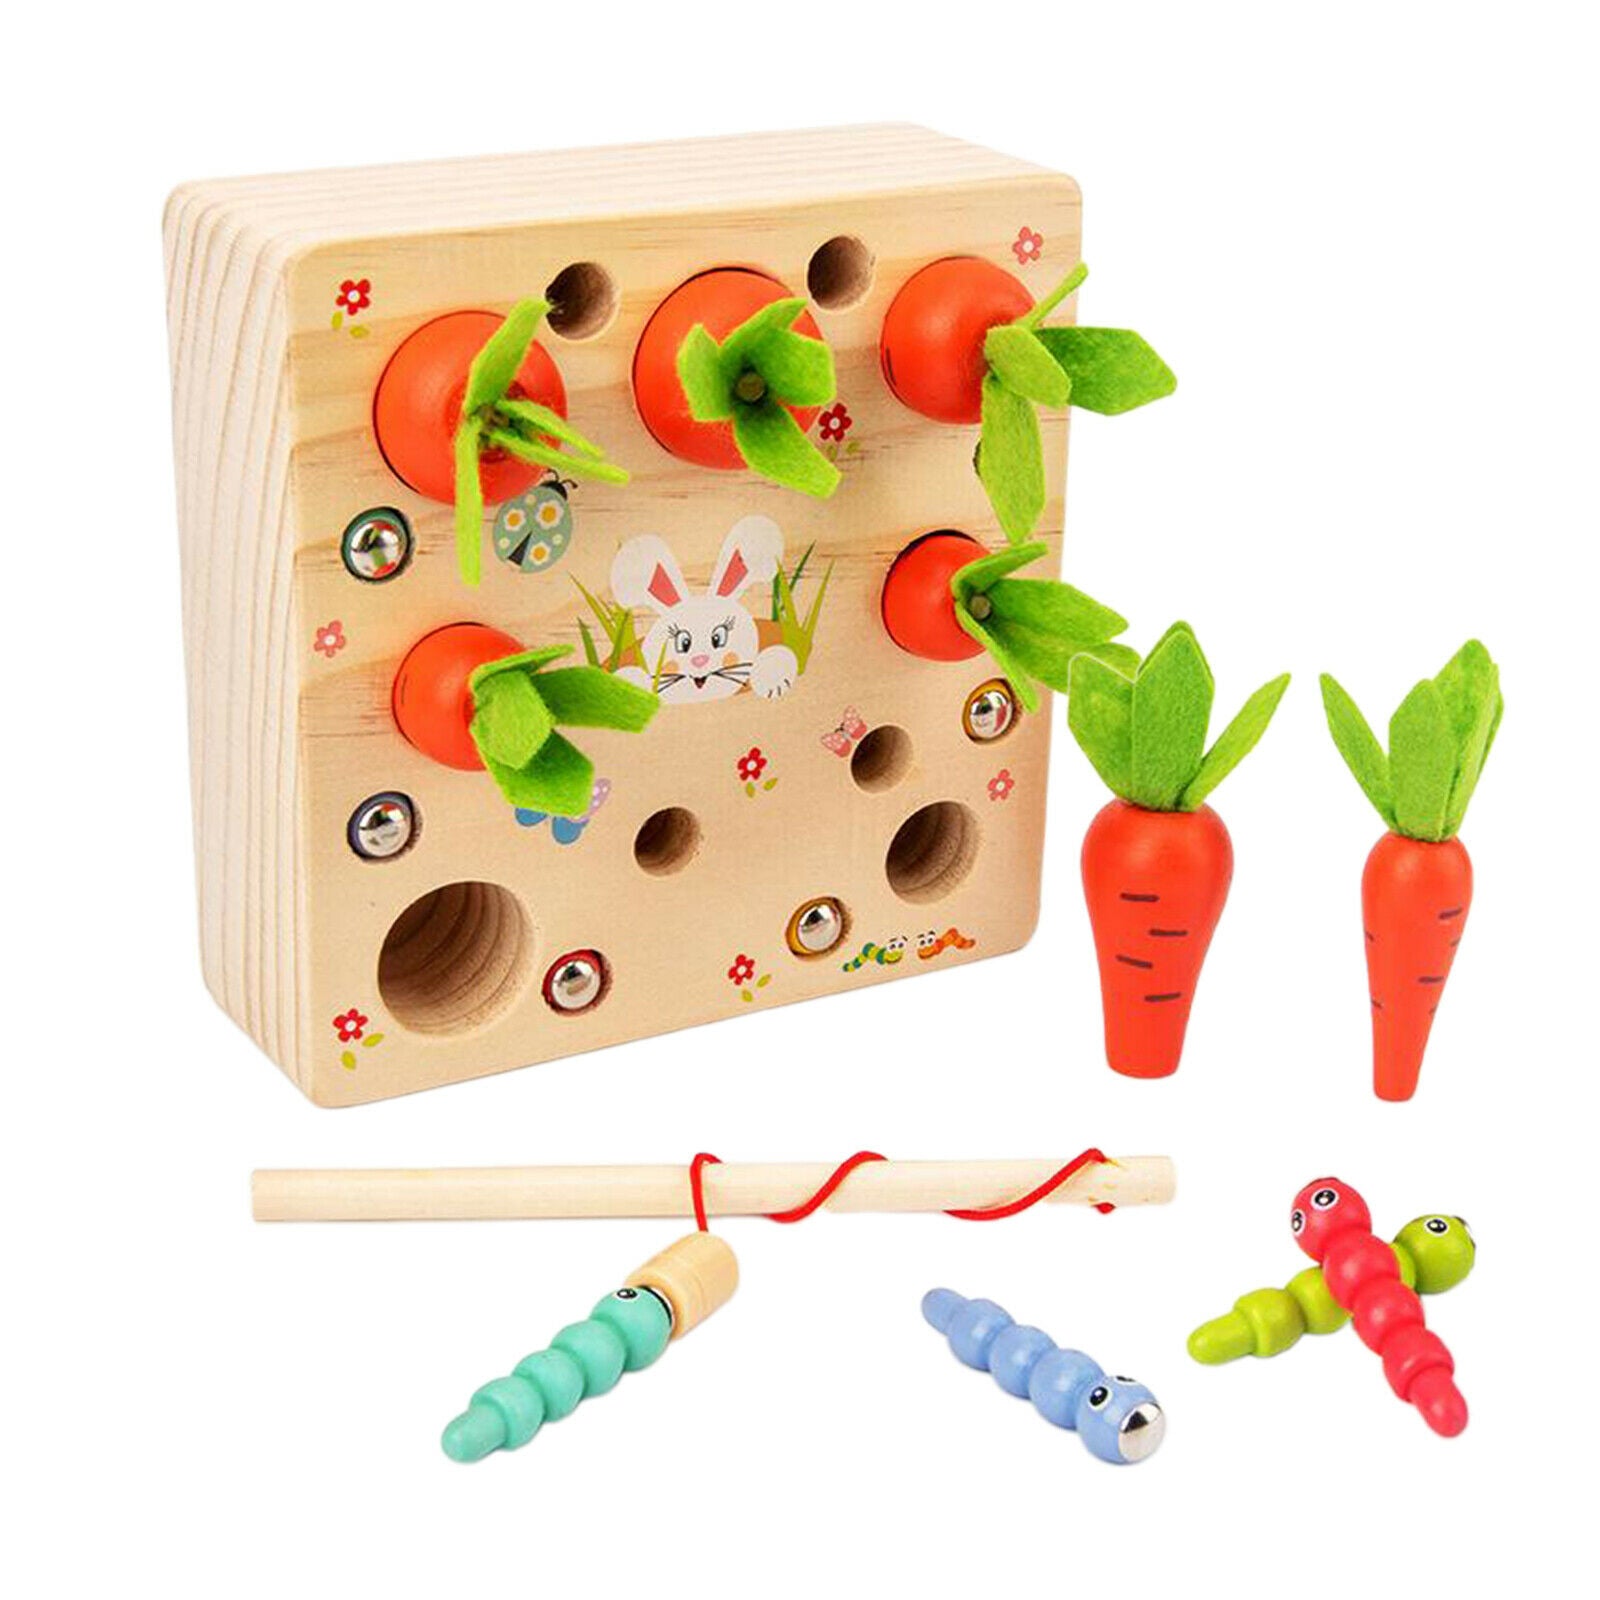 Wooden Montessori Toys, Carrots Harvest Shape Size Sorting Worm Catching